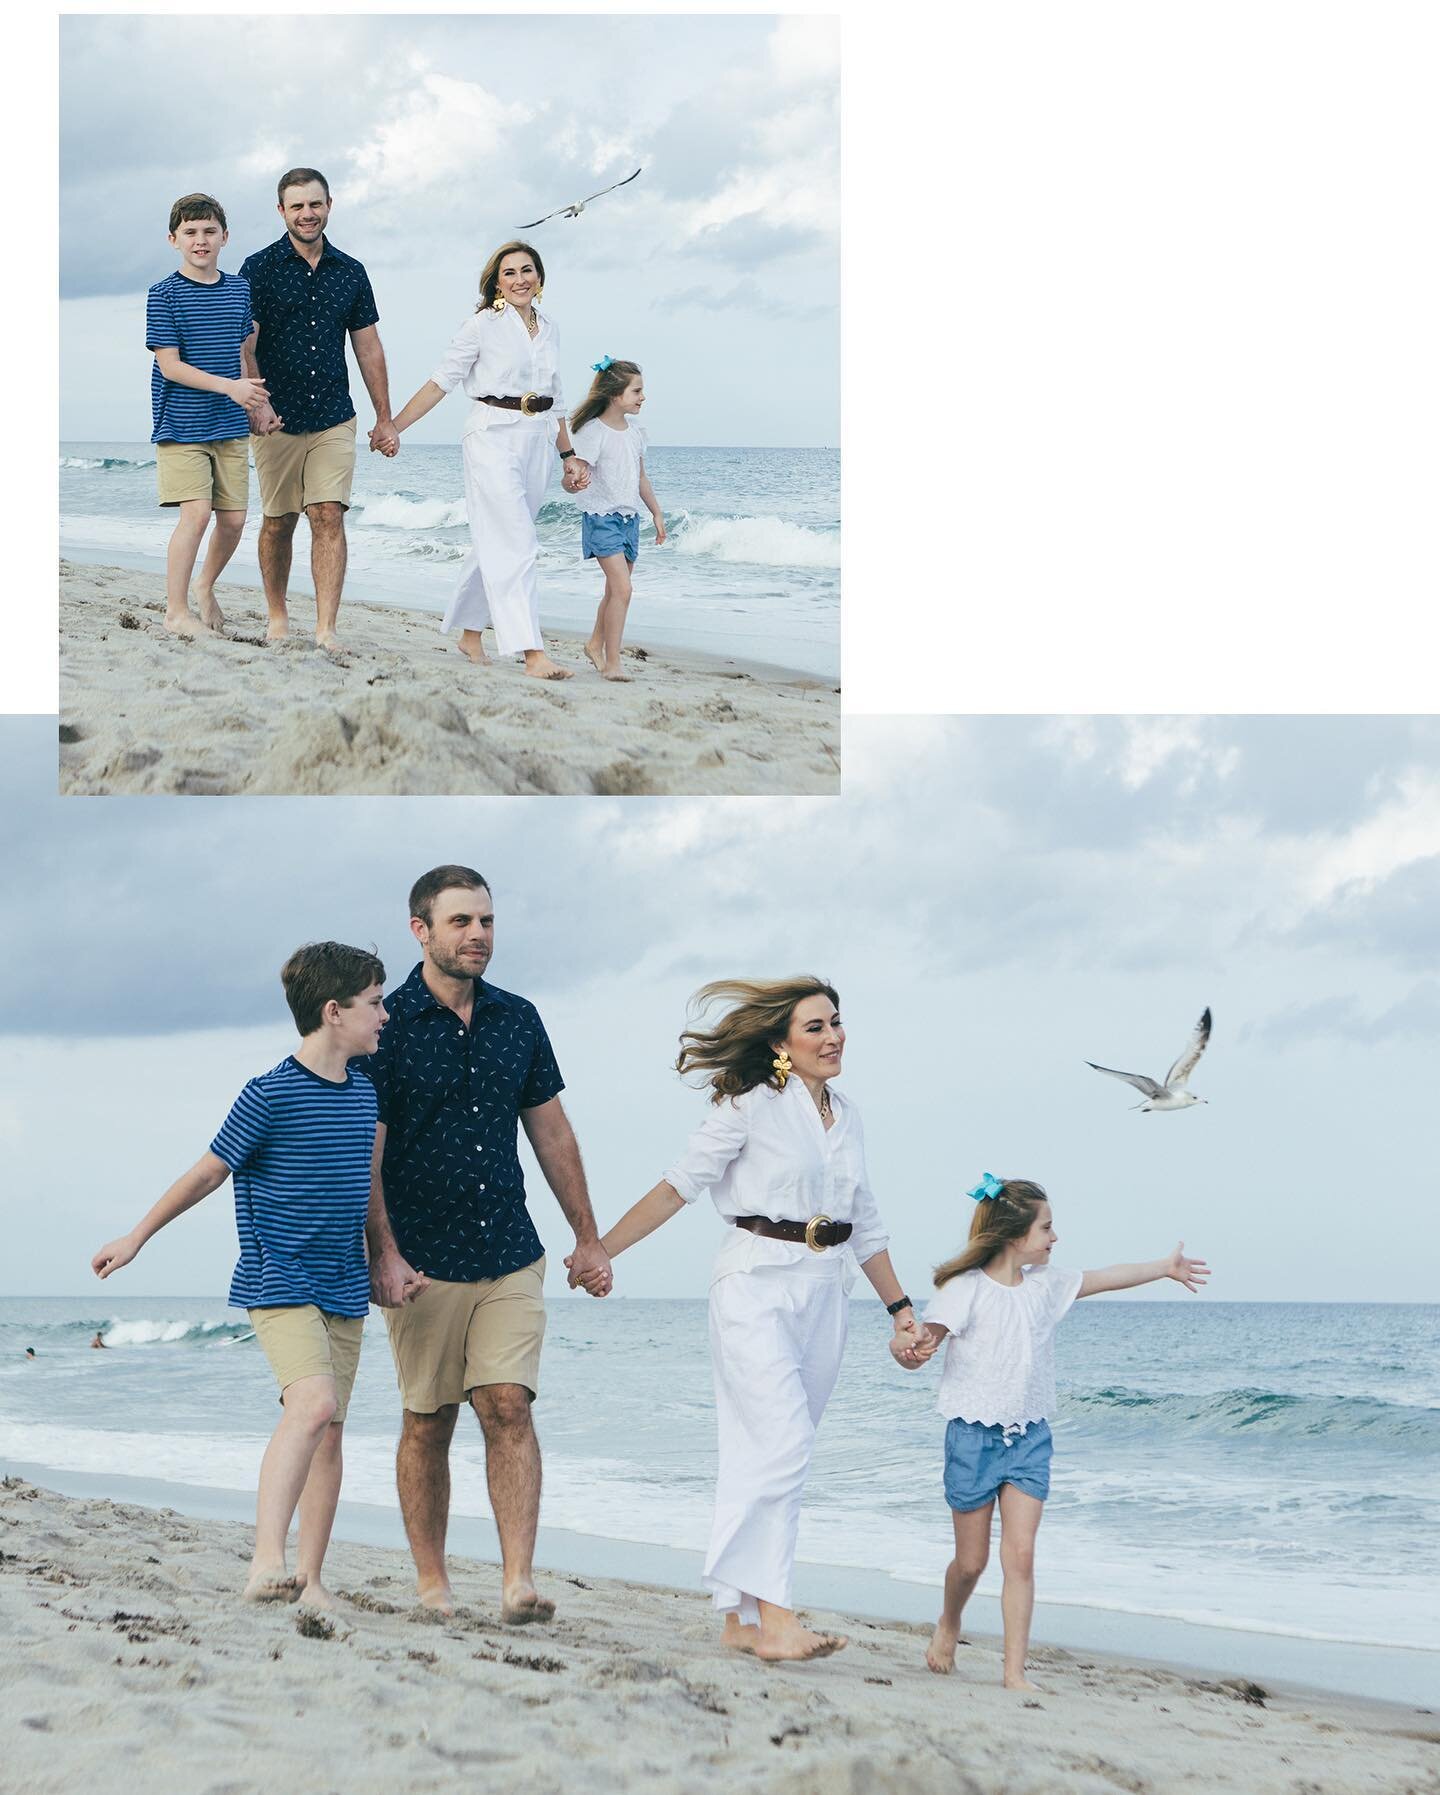 🌊 Fun Family Shoot from over the weekend! 

#deerfield #deerfieldbeach #deerfieldbeachfl #florida #sfl #deerfieldbeachpier #deerfieldbeachphotographer #family #familyphotography #familyphotographer #familyphotoshoot